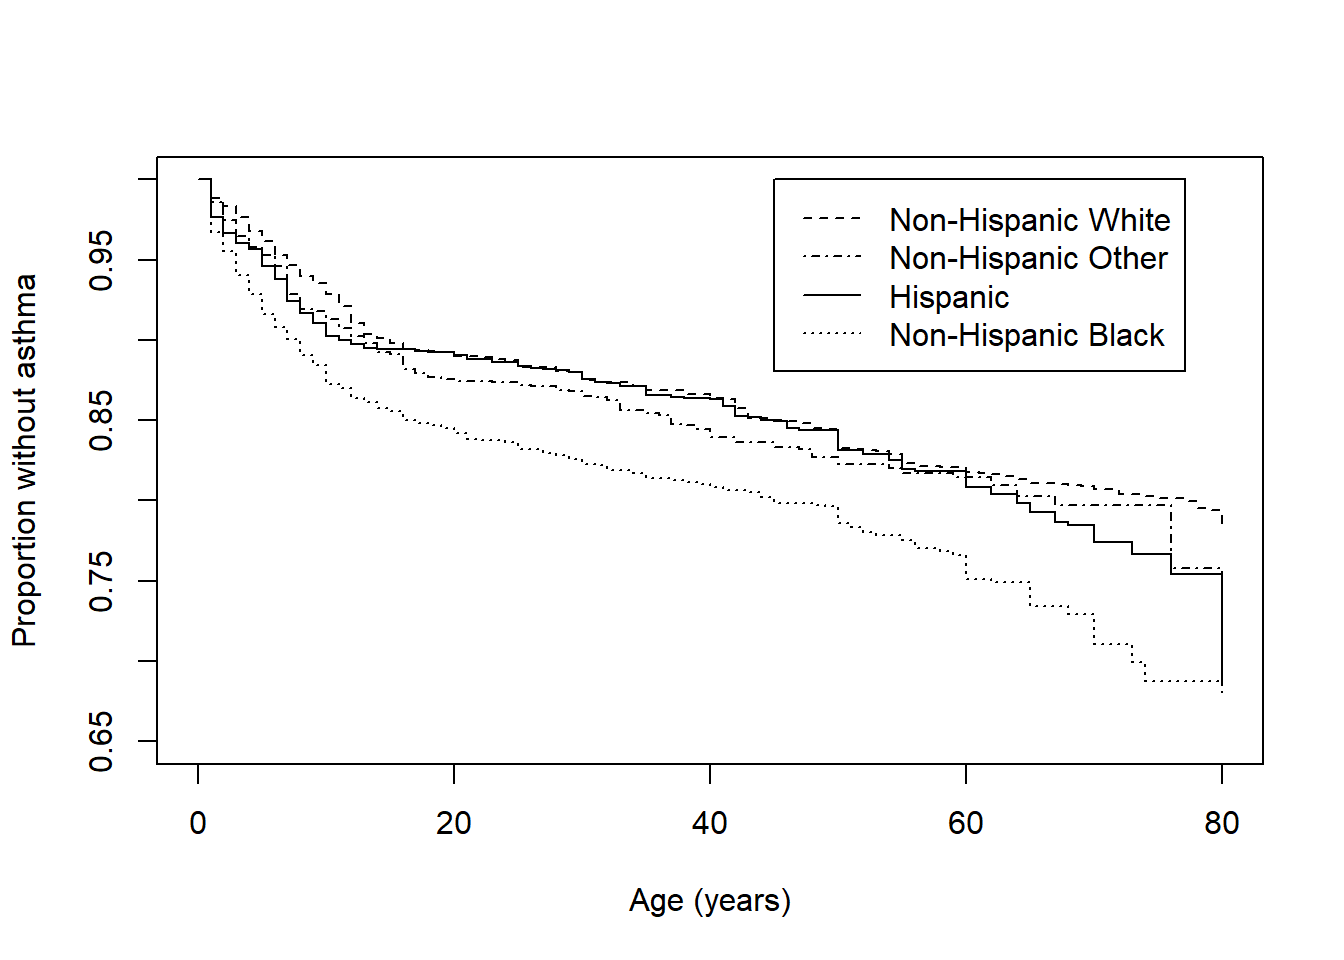 Weighted Kaplan-Meier survival function by race/ethnicity